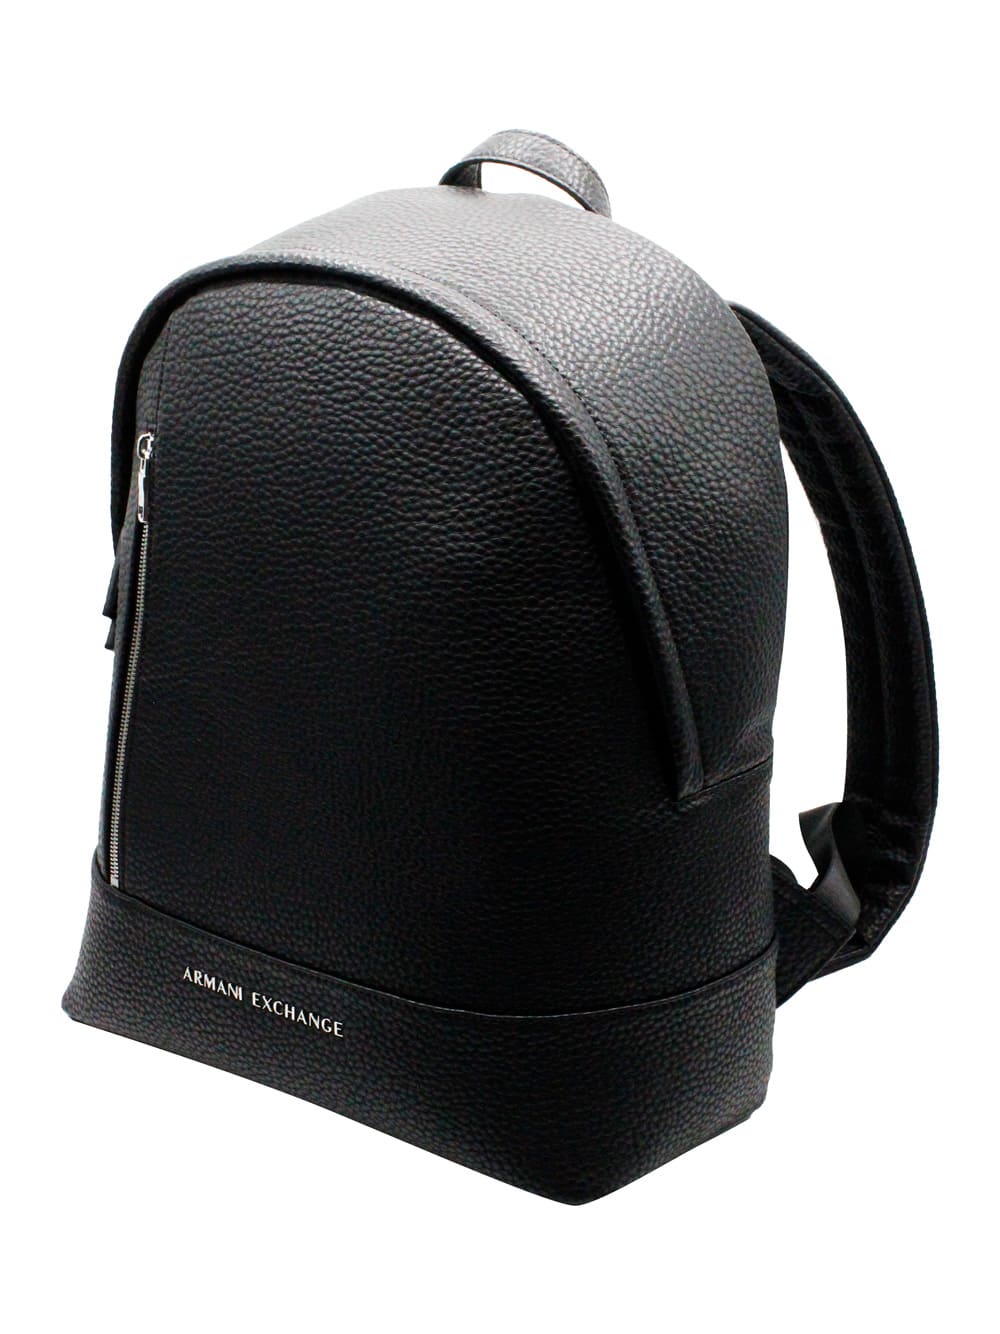 Armani Collezioni Backpack In Very Soft Soft Grain Eco-leather With Logo On The Front. Adjustable Shoulder Straps. Mea In Black